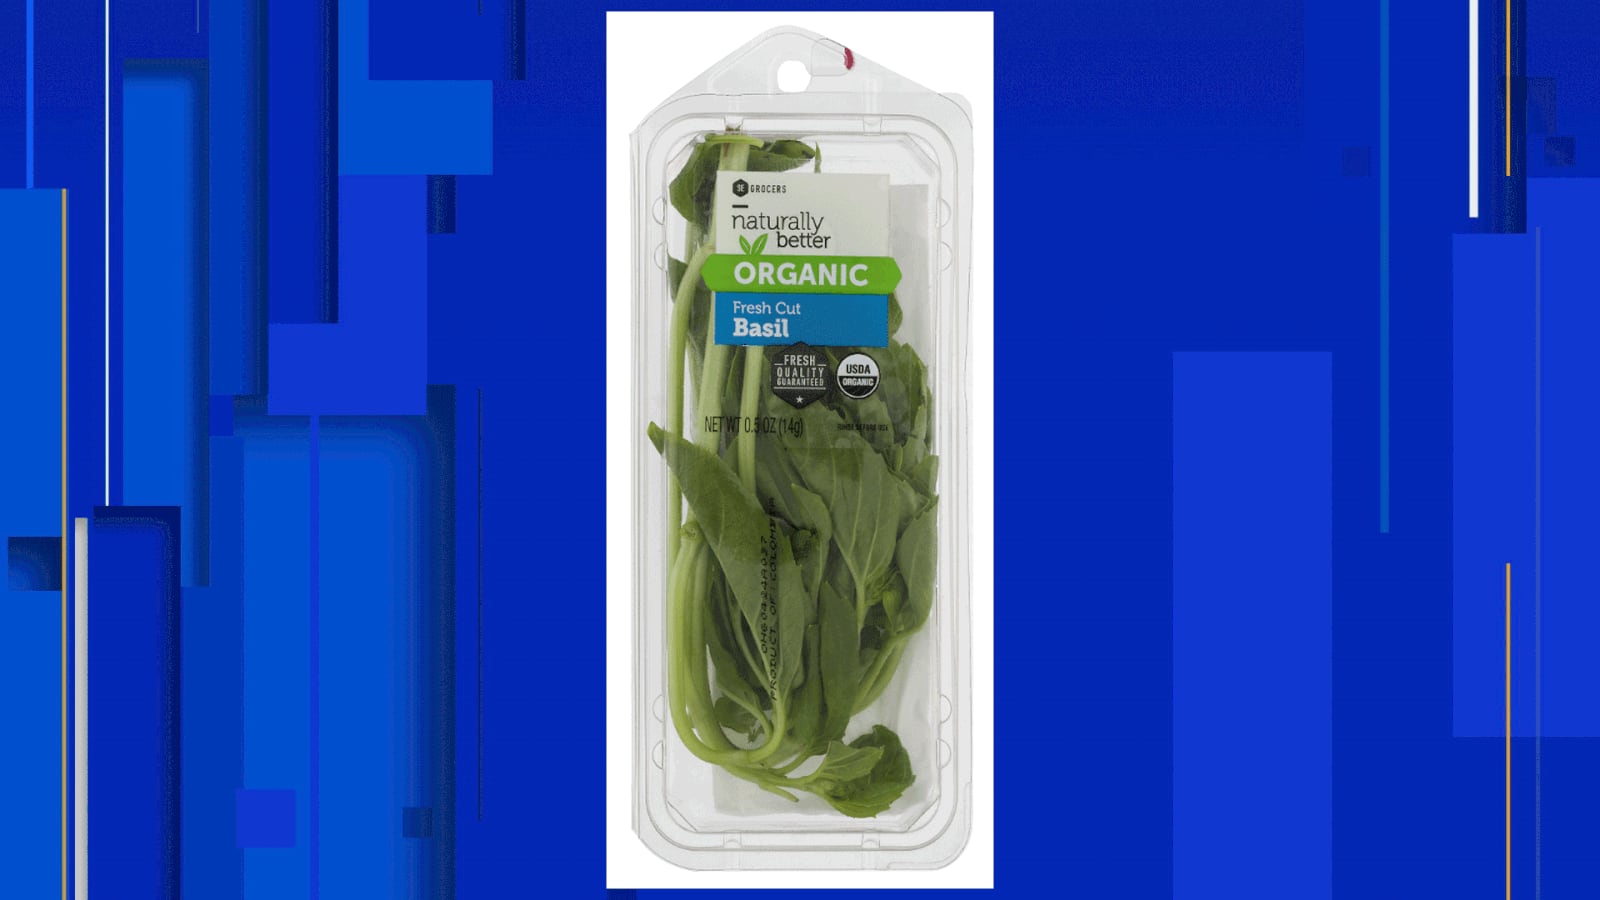 Southeastern Grocers issues voluntary recall of organic basil